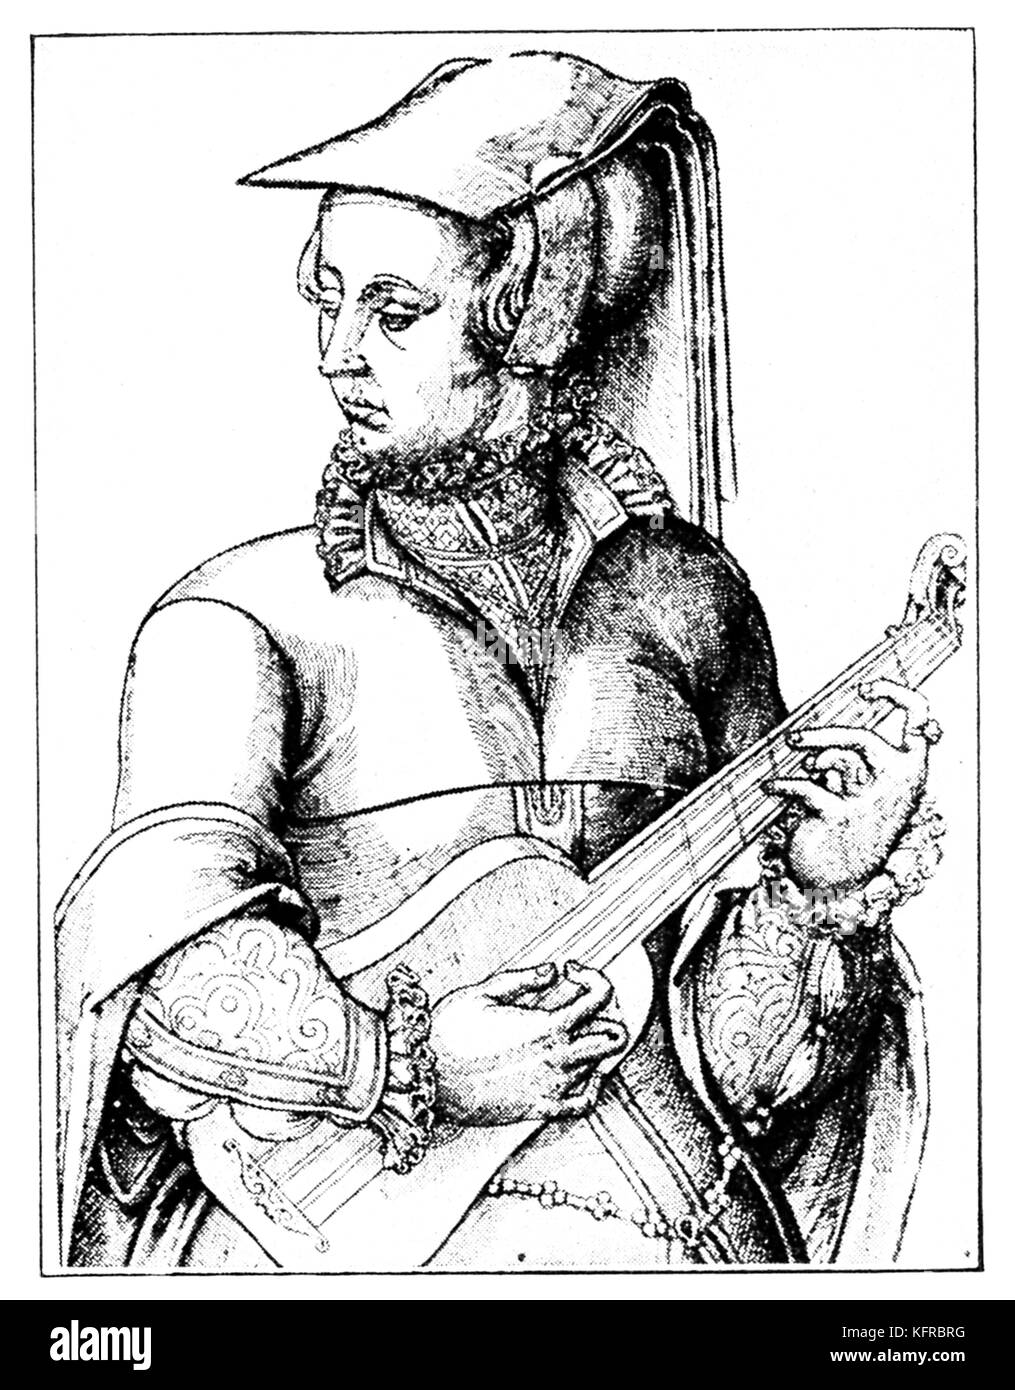 'The Consert' - Guitarist. Renaissance woman playing guitar. Unsigned French series of woodcuts, c. 1570. Stock Photo